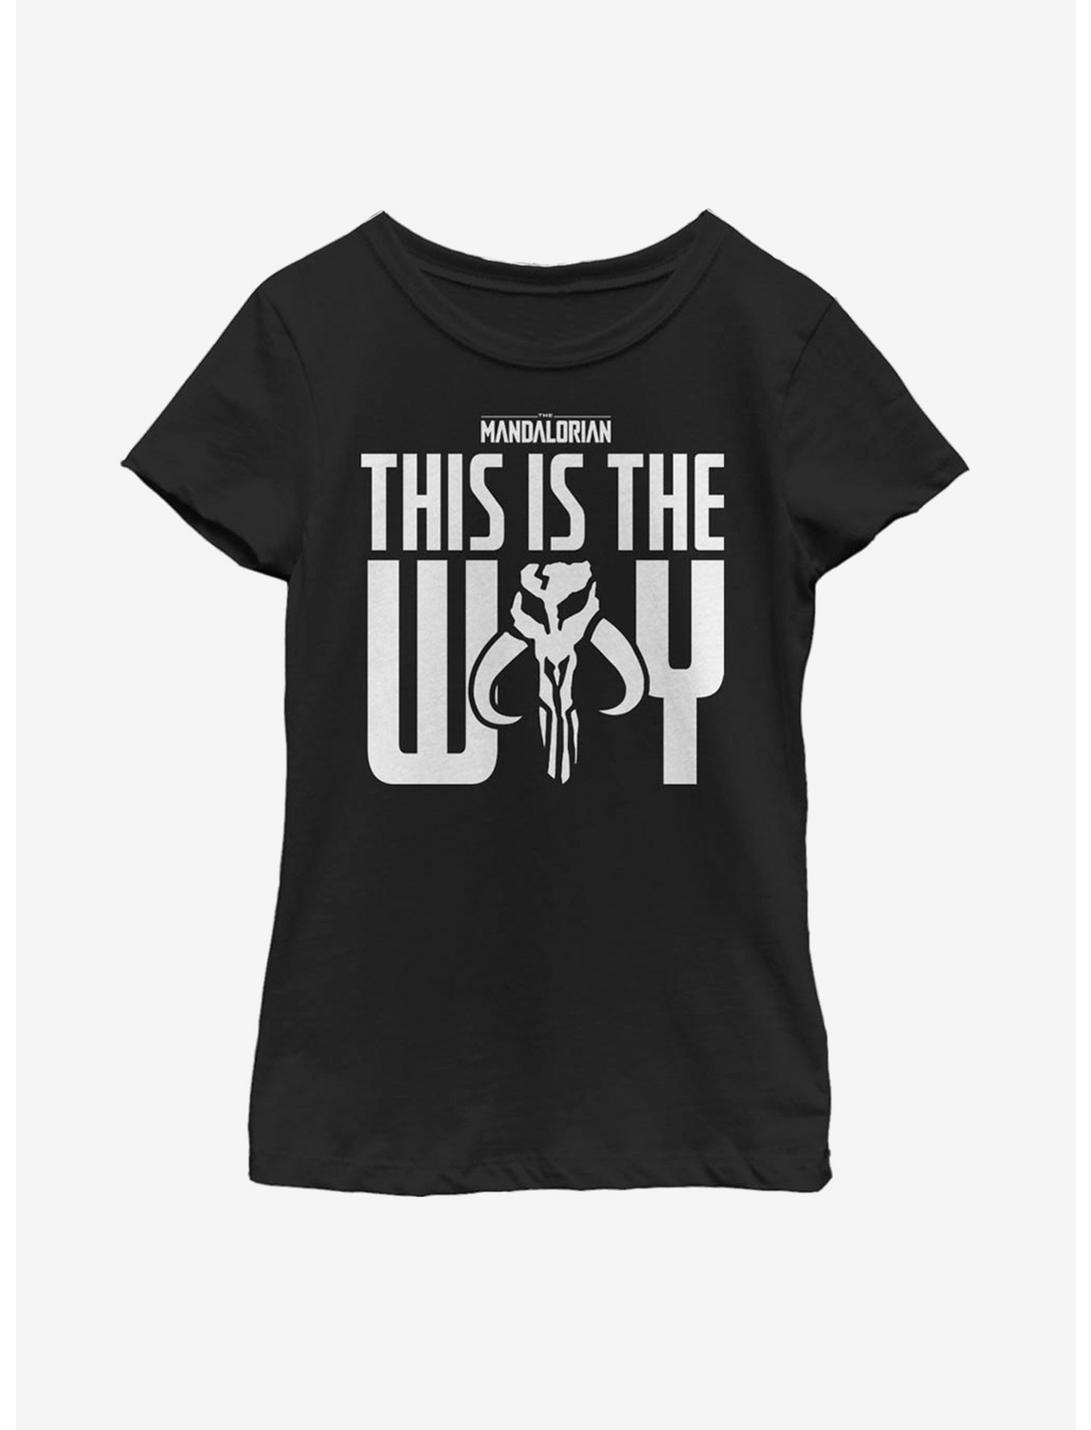 Star Wars The Mandalorian This Is The Way Youth Girls T-Shirt, BLACK, hi-res